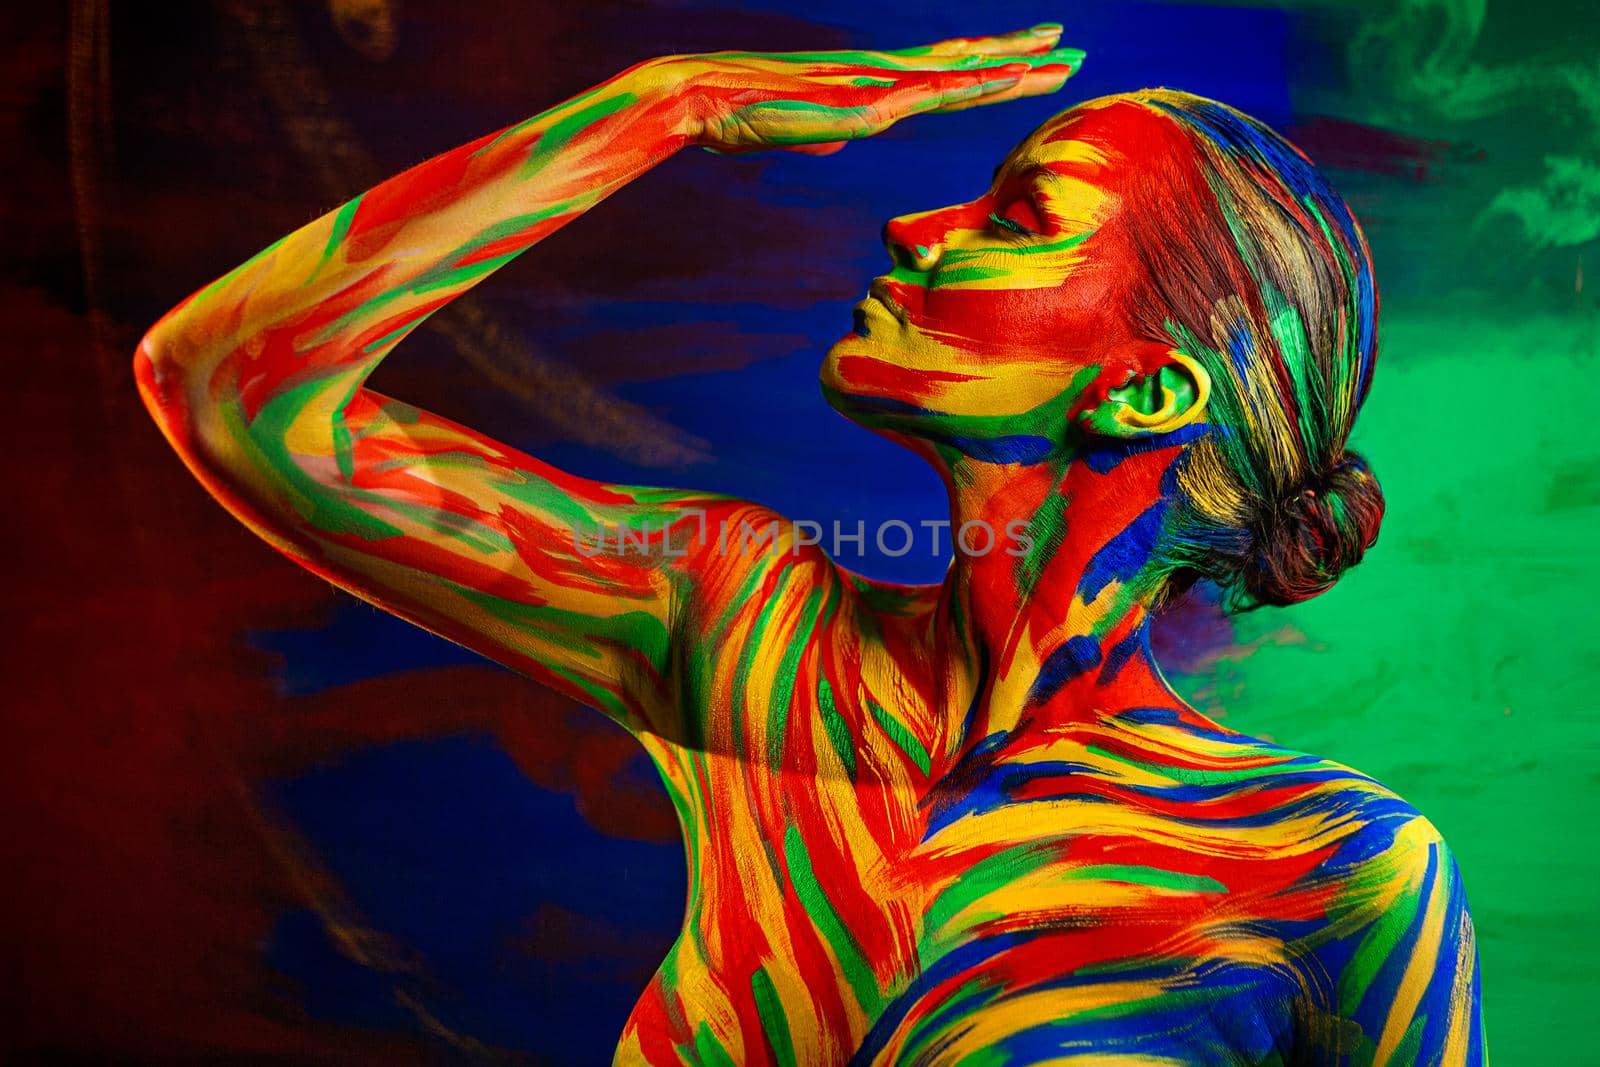 Color art face of woman for inspiration. Abstract portrait of the bright beautiful girl with colorful make-up and bodyart. by MikeOrlov